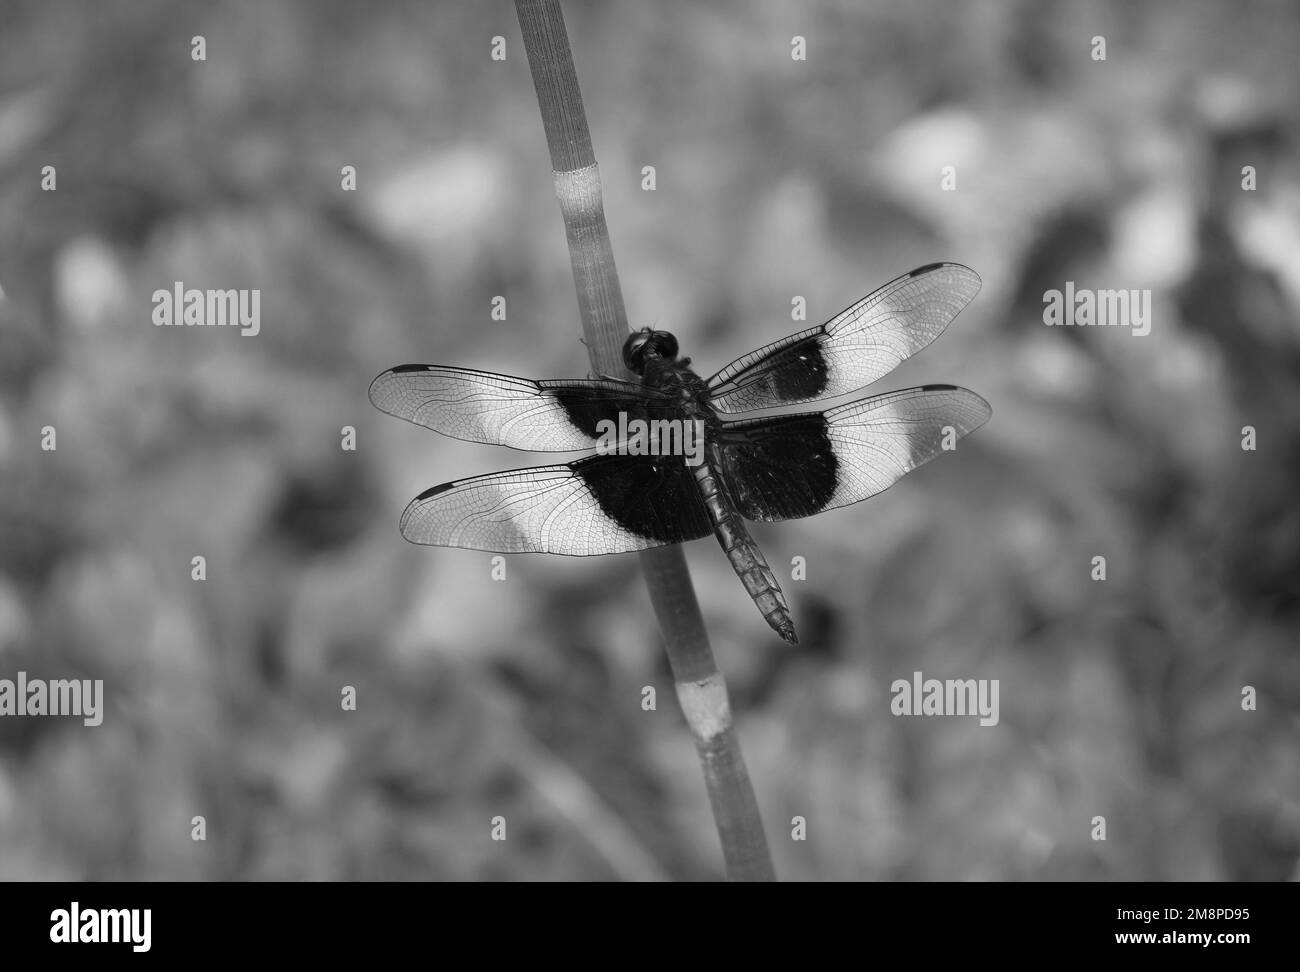 Widow skiimer dragonfly perched on a stalk on a summer day in Osceola, Wisconsin USA. Done in black and white. Stock Photo